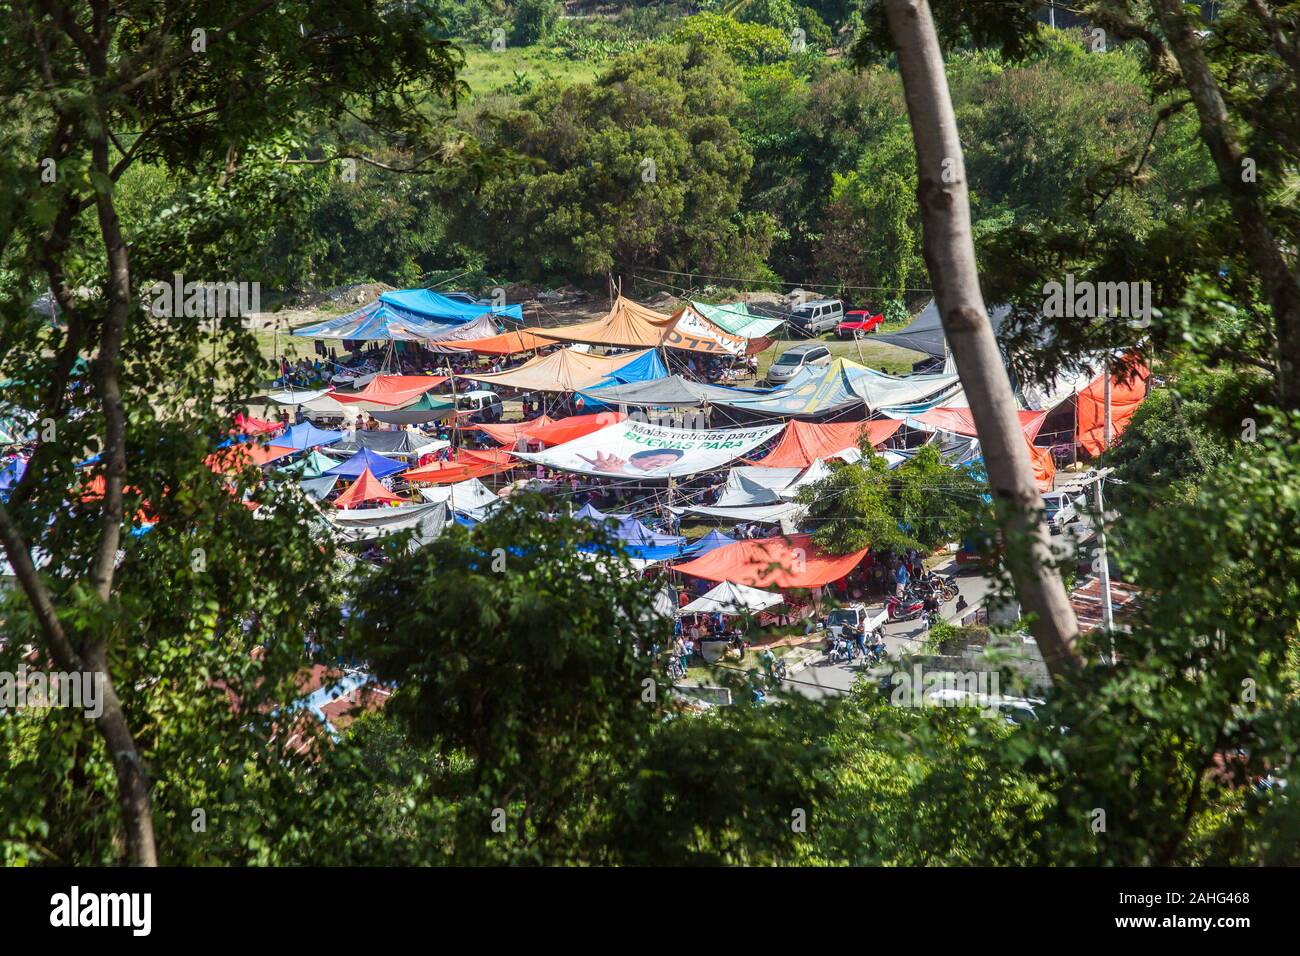 dramatic colourful image of tents and tarps in a small Haitian market in the caribbean mountains of the dominican republic. Stock Photo